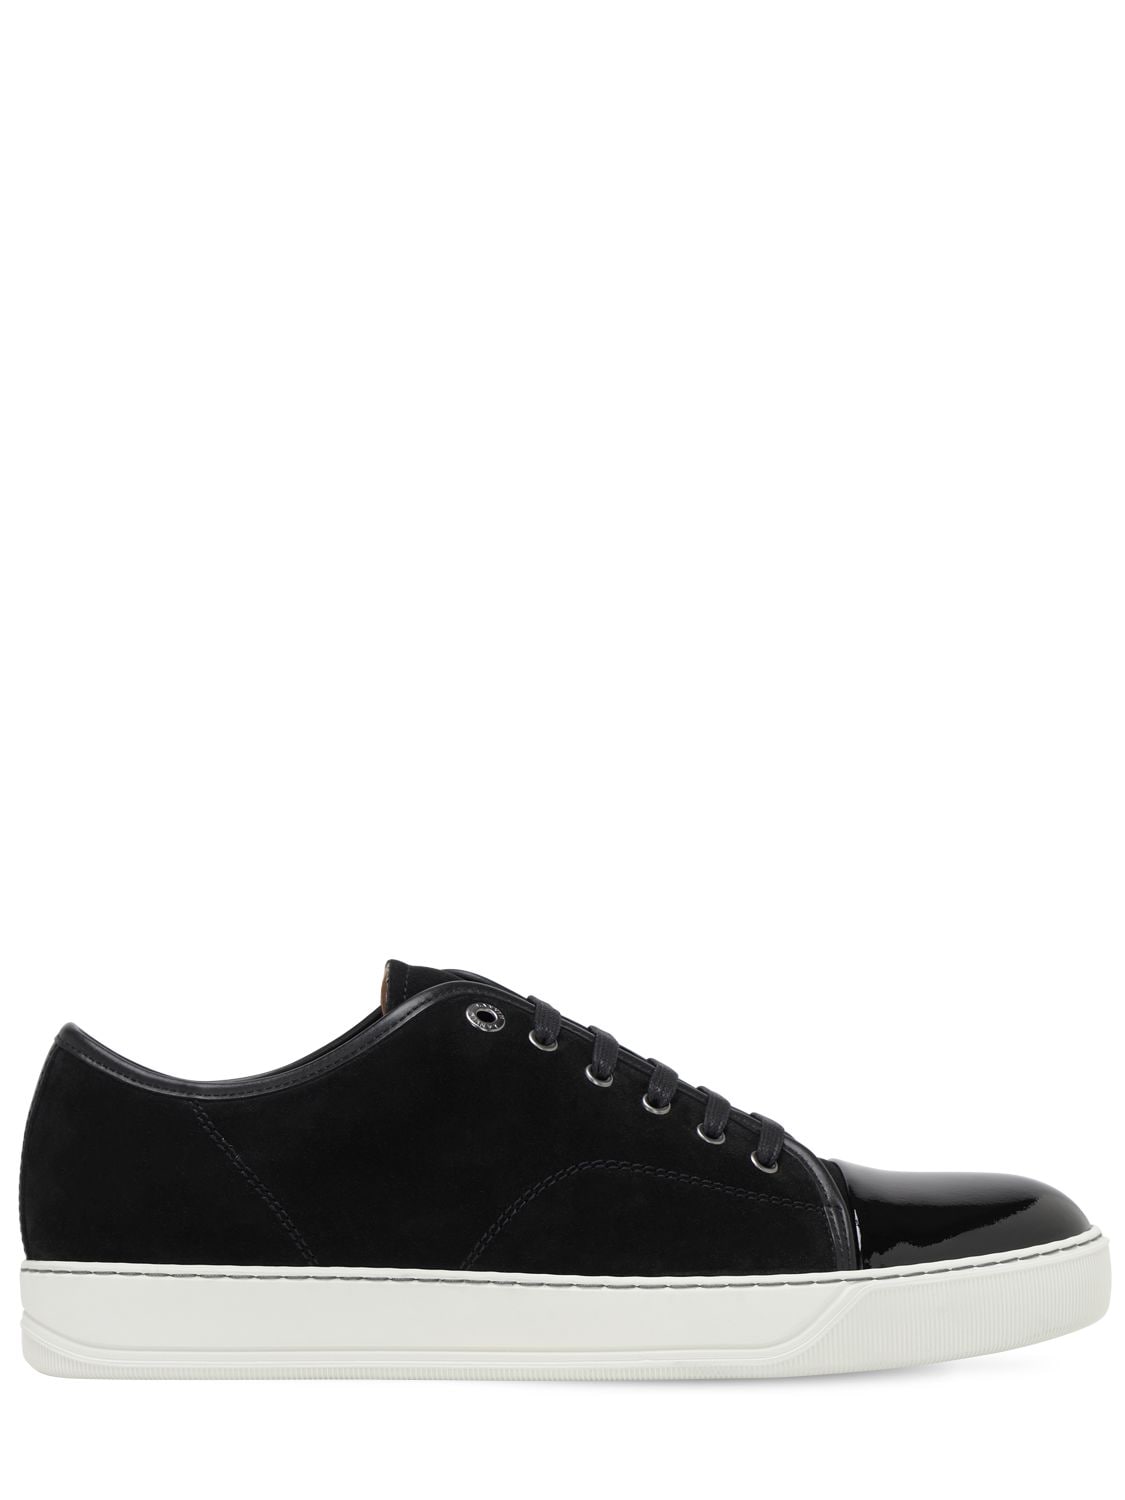 Suede & Leather Low Top Sneakers